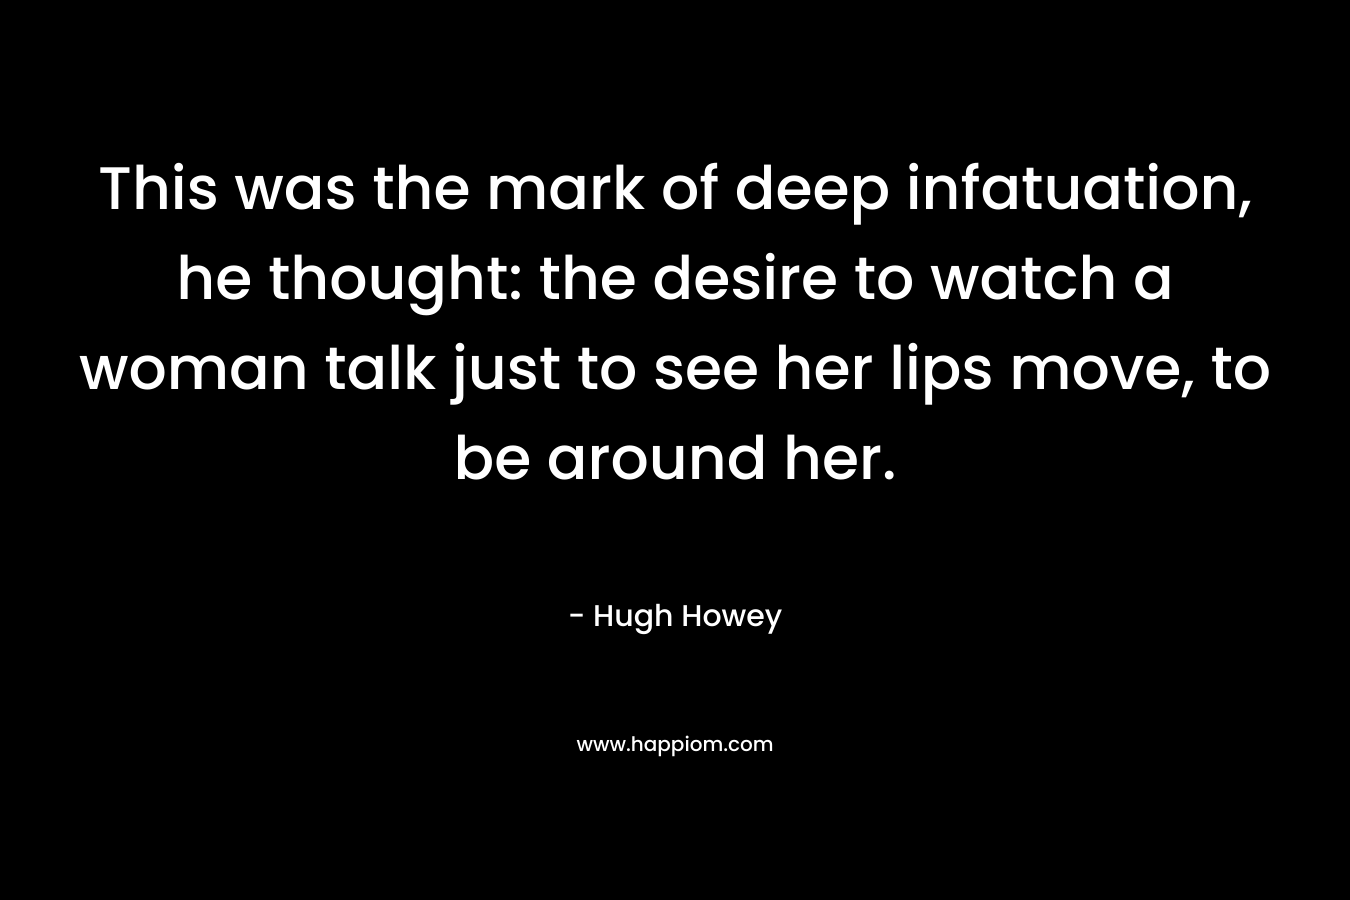 This was the mark of deep infatuation, he thought: the desire to watch a woman talk just to see her lips move, to be around her. – Hugh Howey